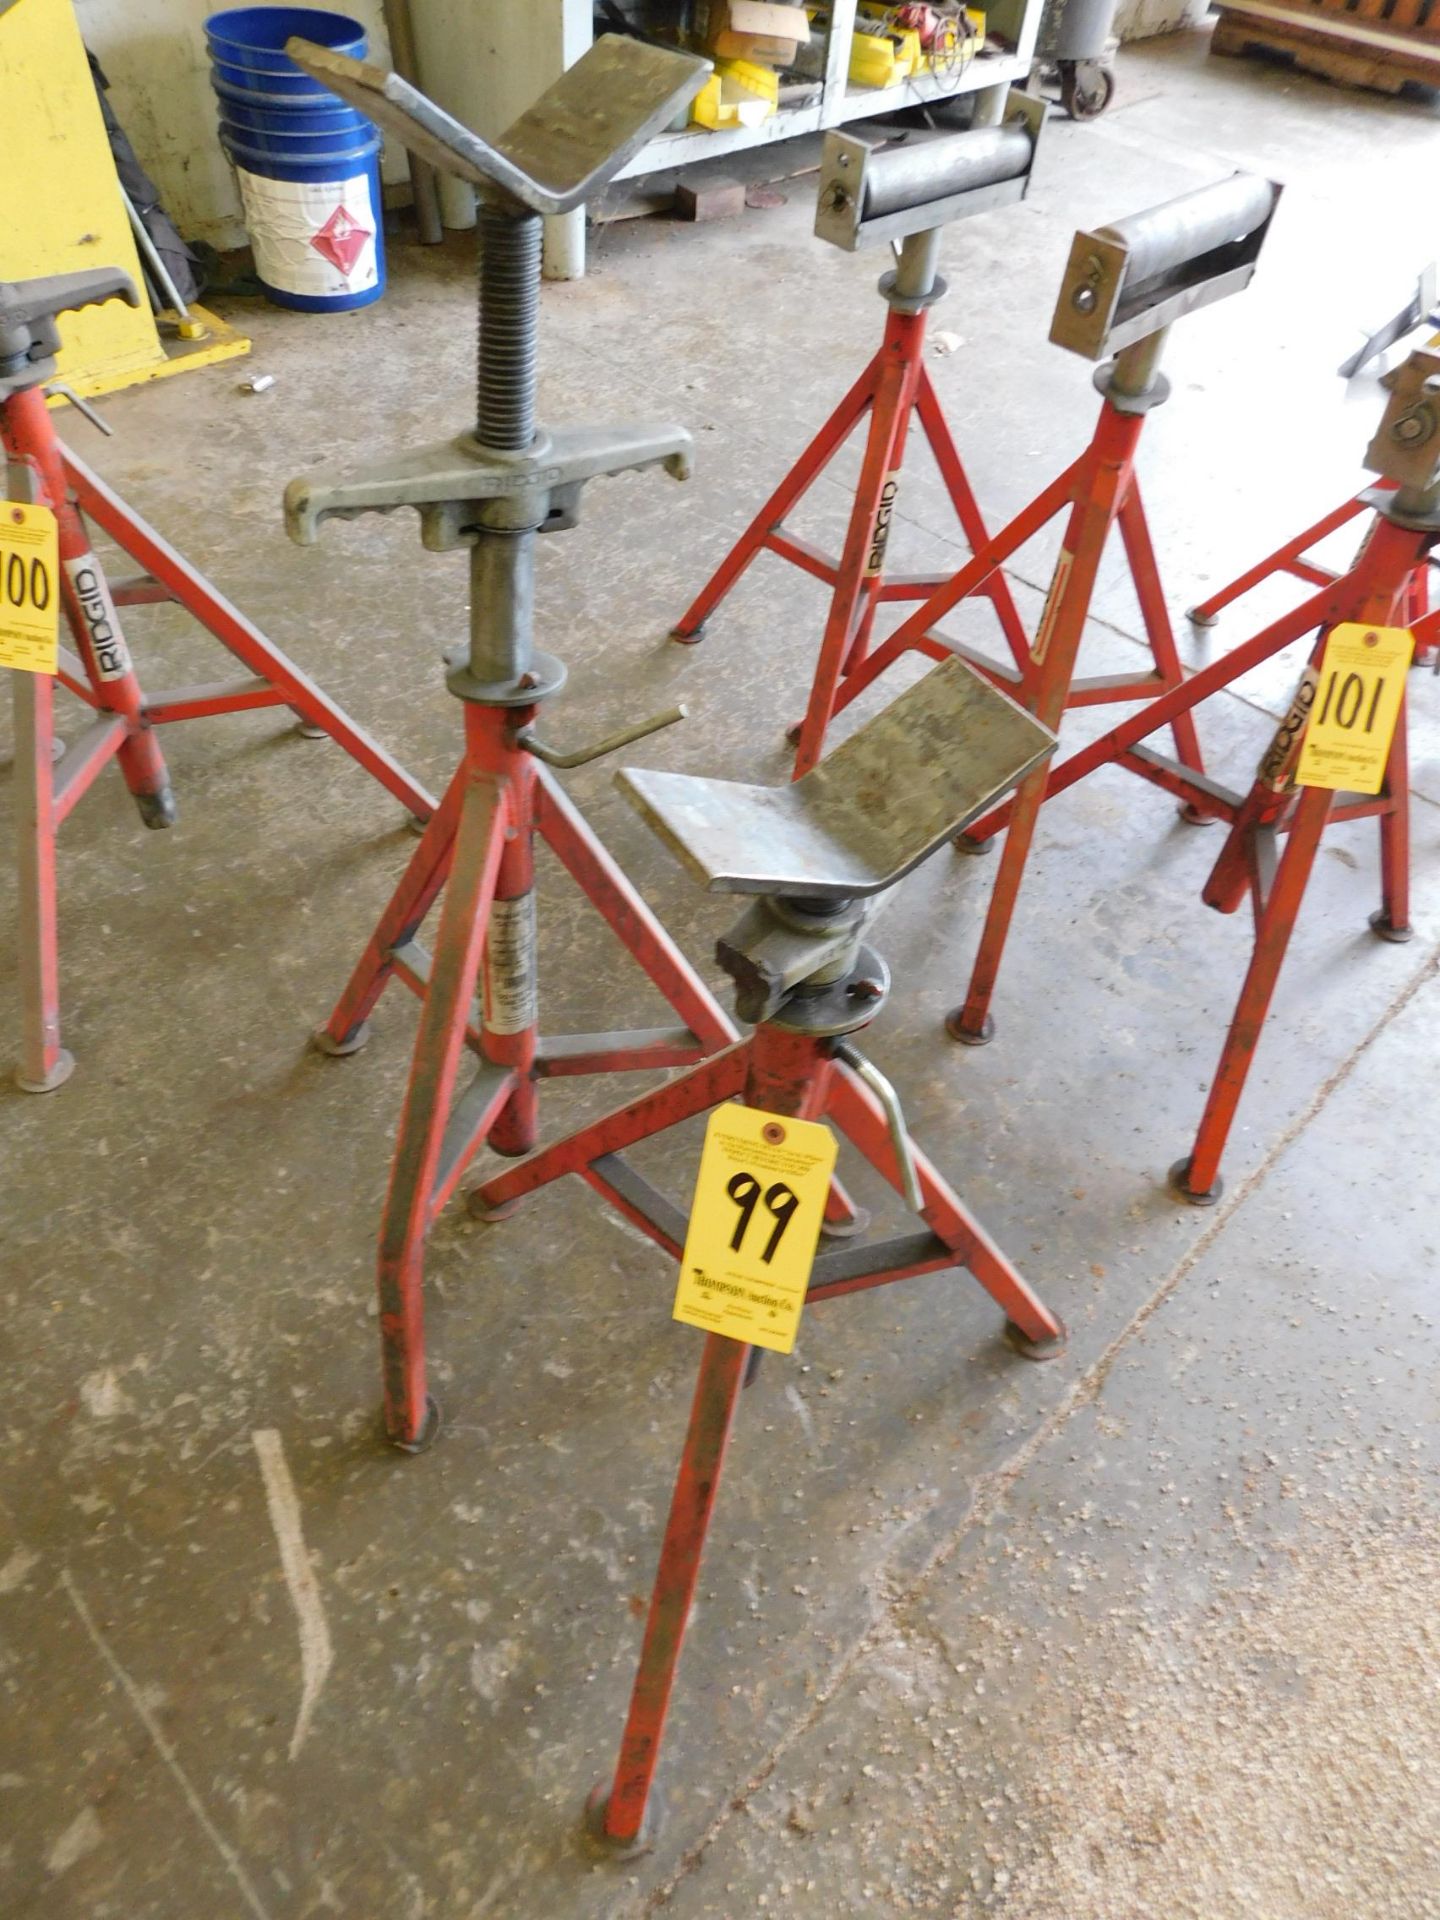 (2) Rigid Support Stands